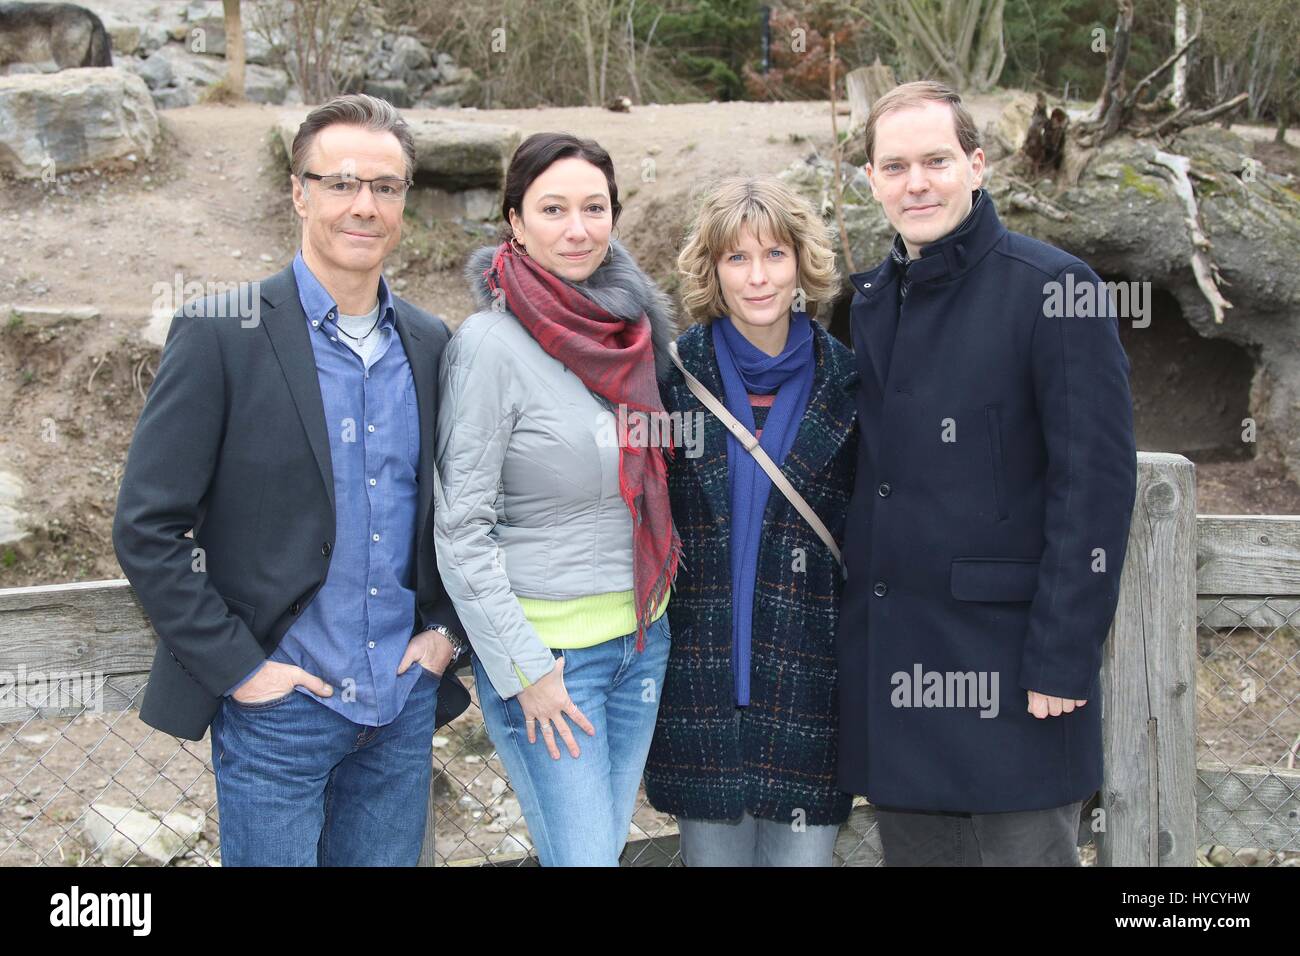 Photocall at the set of NDR Film 'Meine fremde Freundin' at Zoo Hannover.  Featuring: Hannes Jaenicke, Ursula Strauss, Valerie Niehaus, Godehard Giese  Where: Hannover, Germany When: 03 Mar 2017 Stock Photo - Alamy